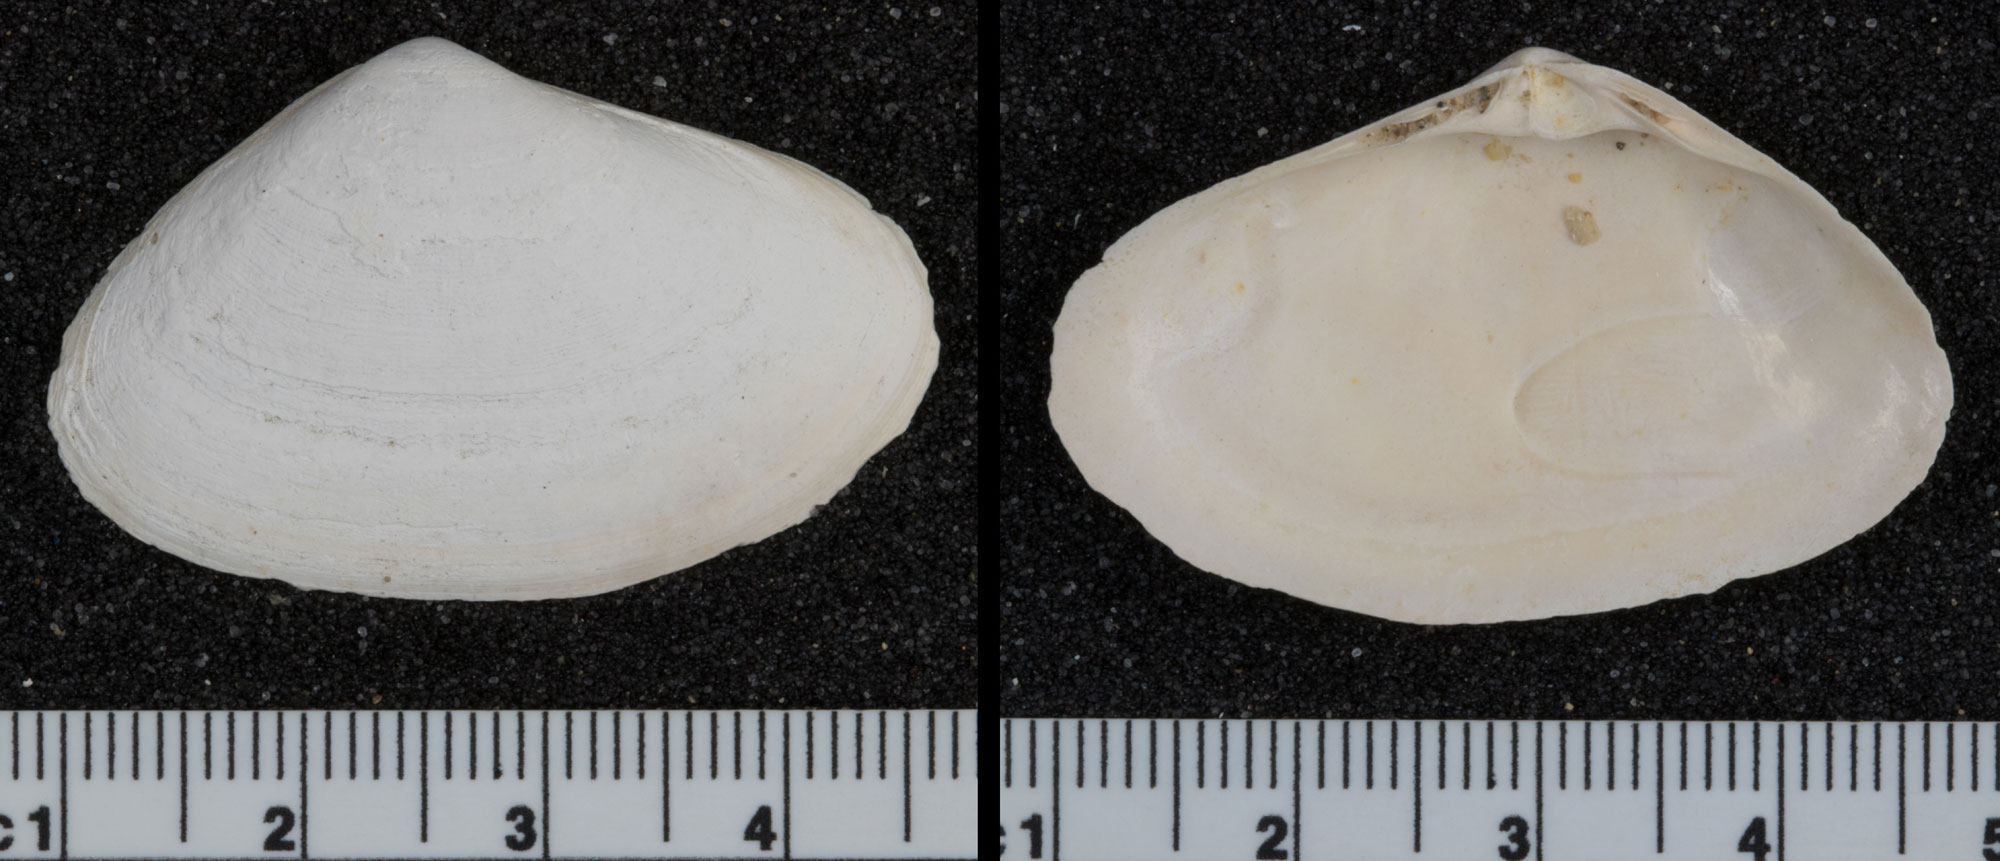 Photographs showing two views of a single valve of a clam shell, one of the outer surface and one of the inner surface. The shell is wider than tall and white in color. A ruler at the bottom each image indicates that the valve is about 3.5 centimeters across.